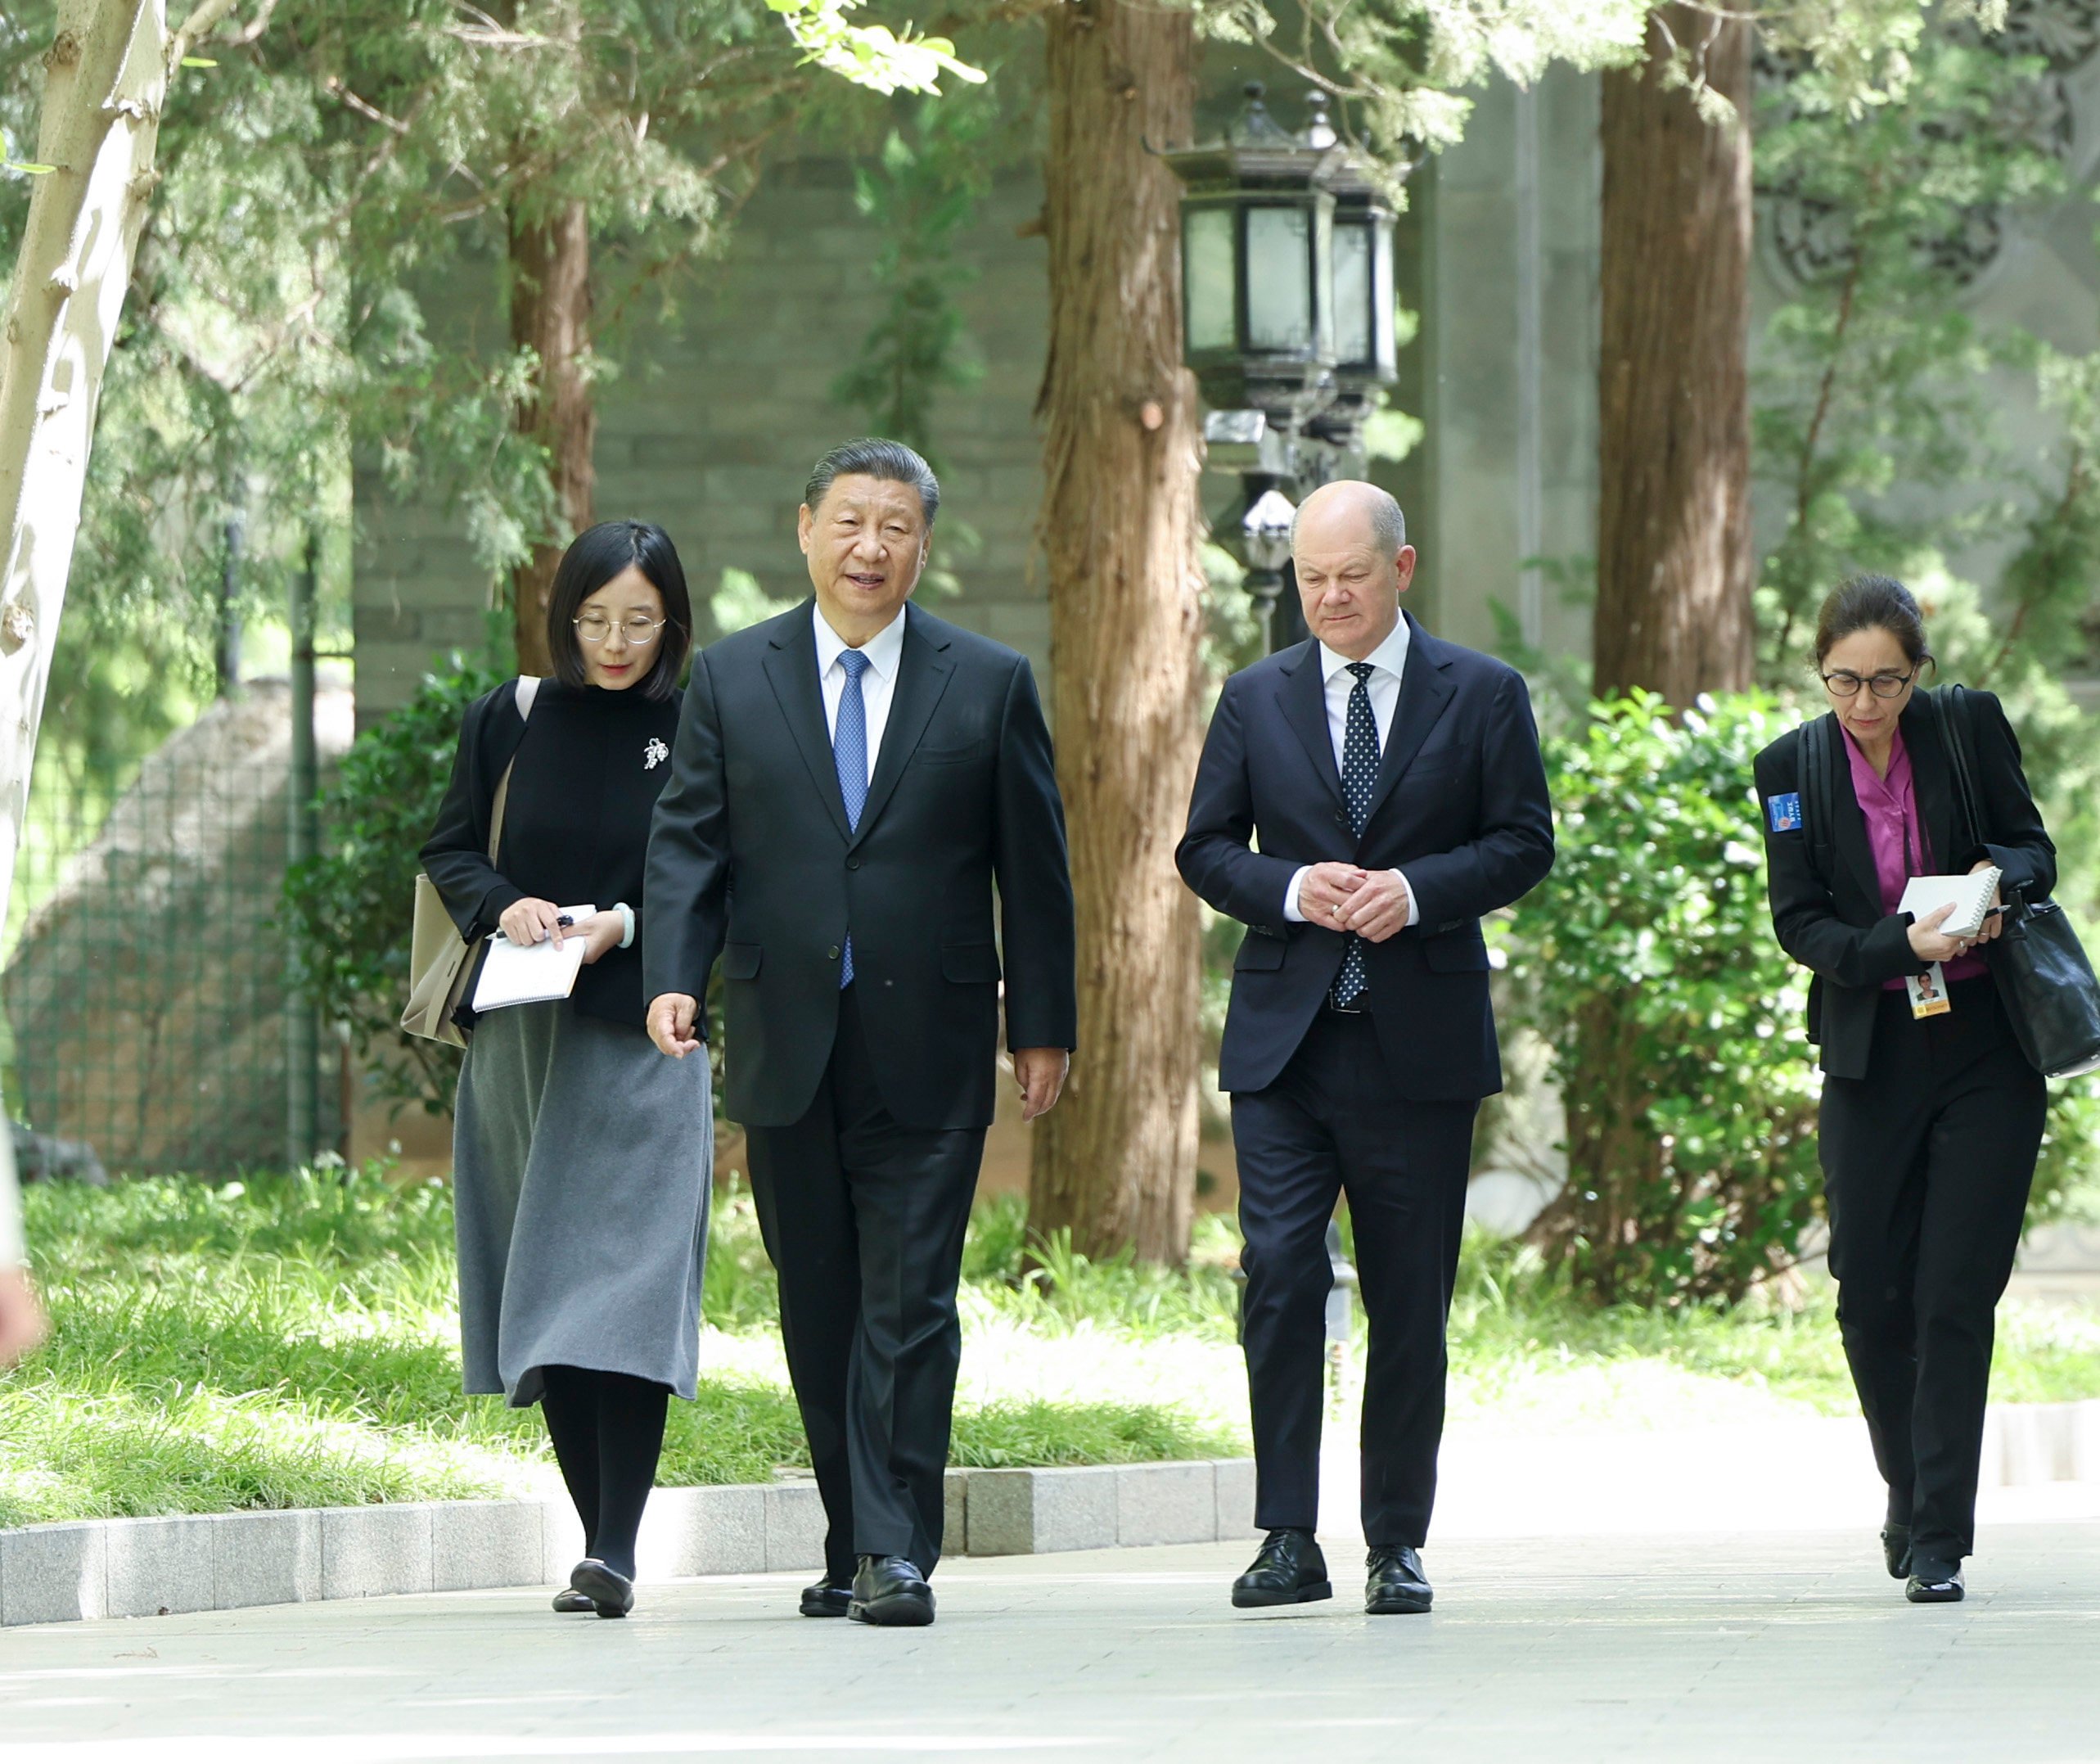 Xi Jinping and Olaf Scholz pictured strolling through the grounds of the Diaoyutai State Guesthouse in Beijing on Tuesday. Photo: Xinhua